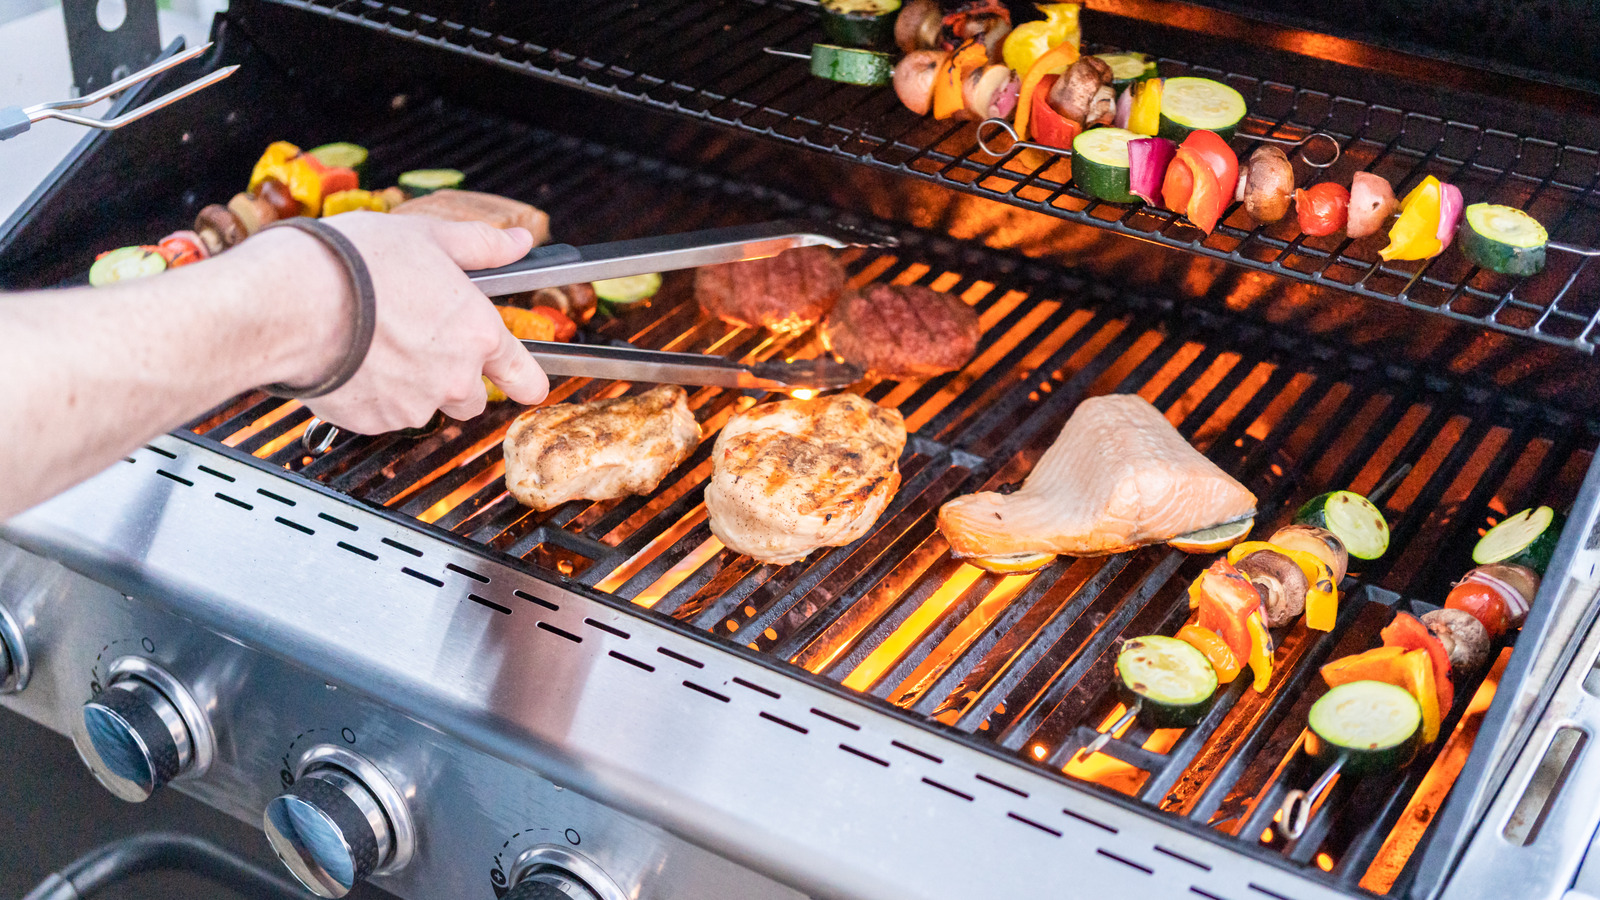 The Easy Method To Achieve Smoky Barbecue Flavors On A Gas Grill